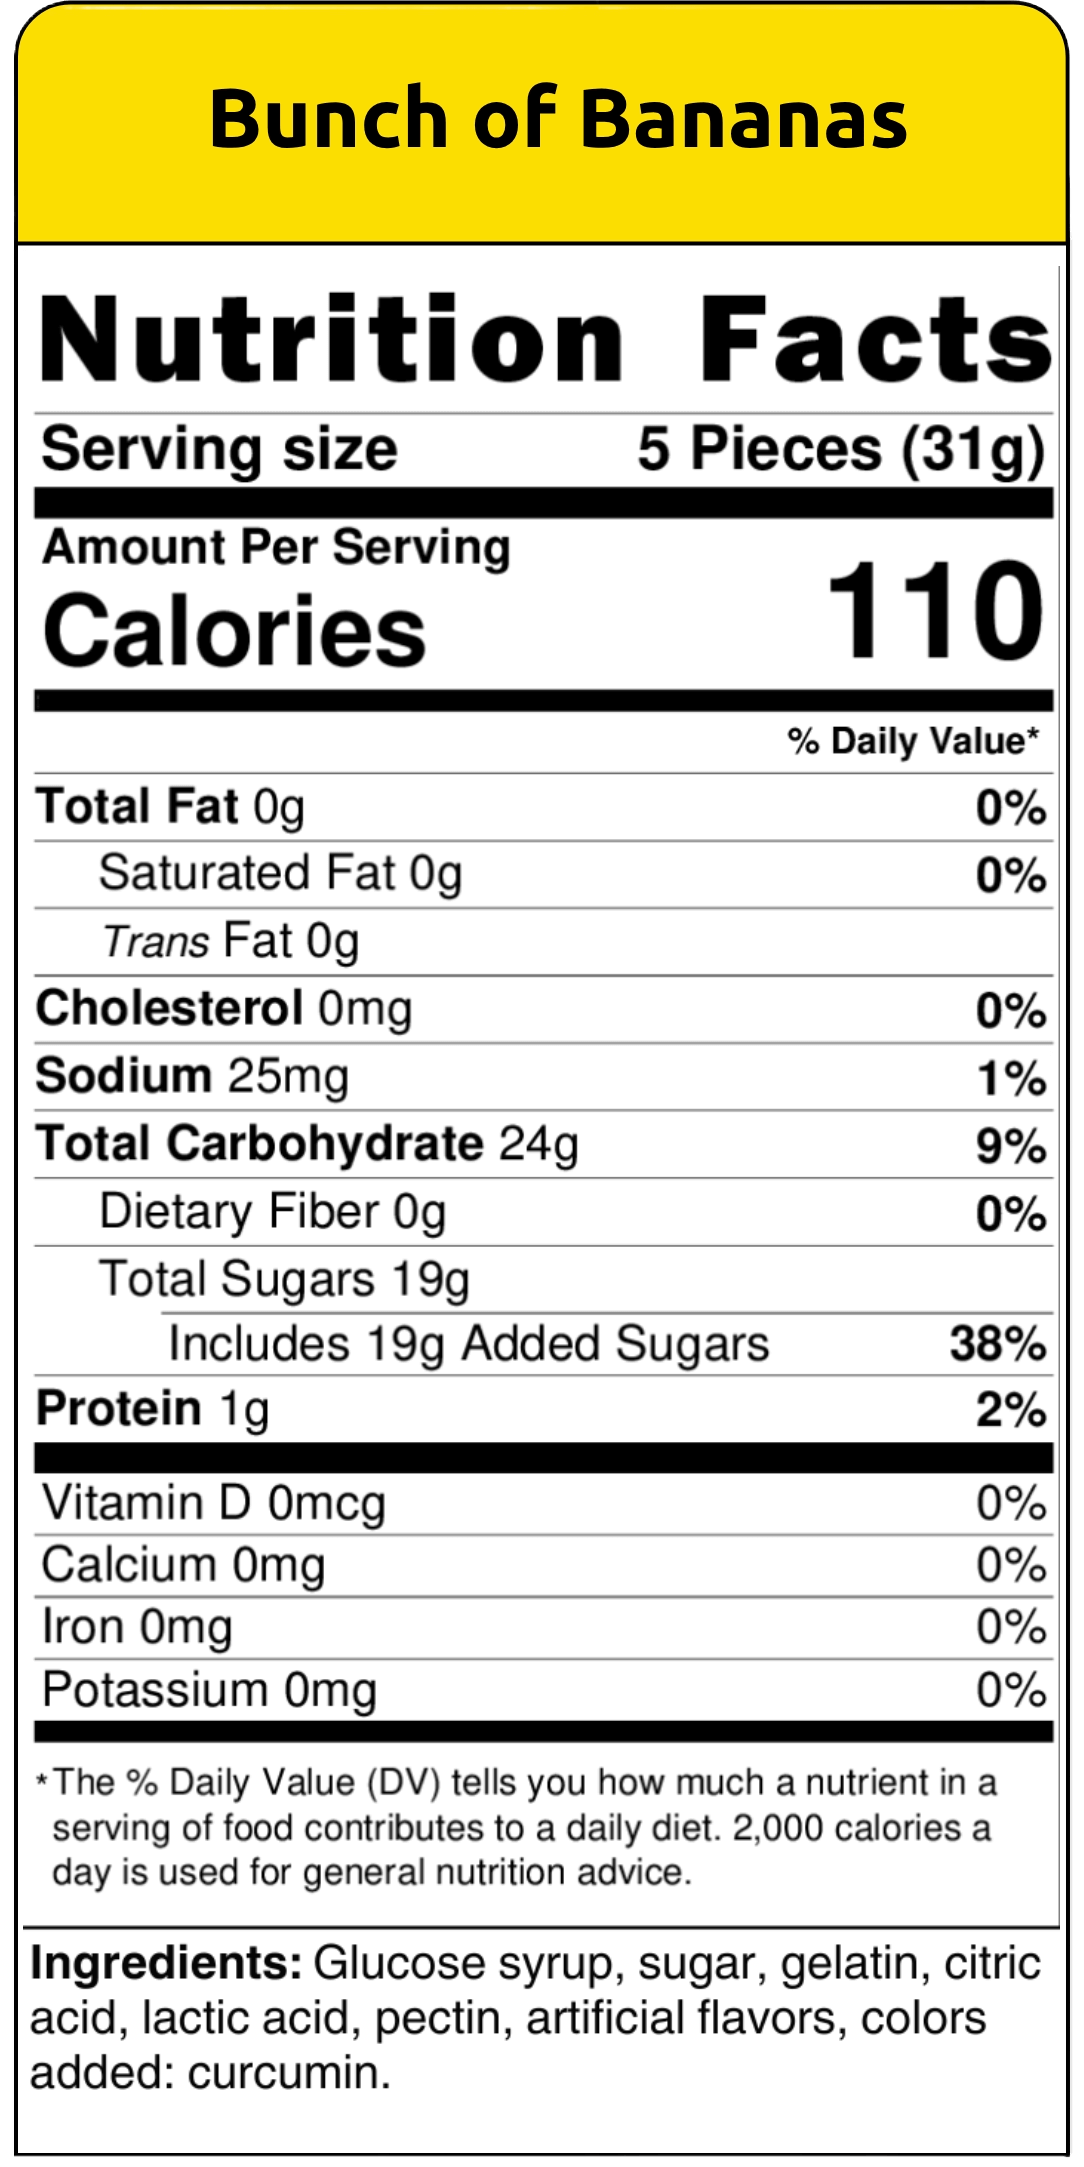 nutritional facts bunch of bananas